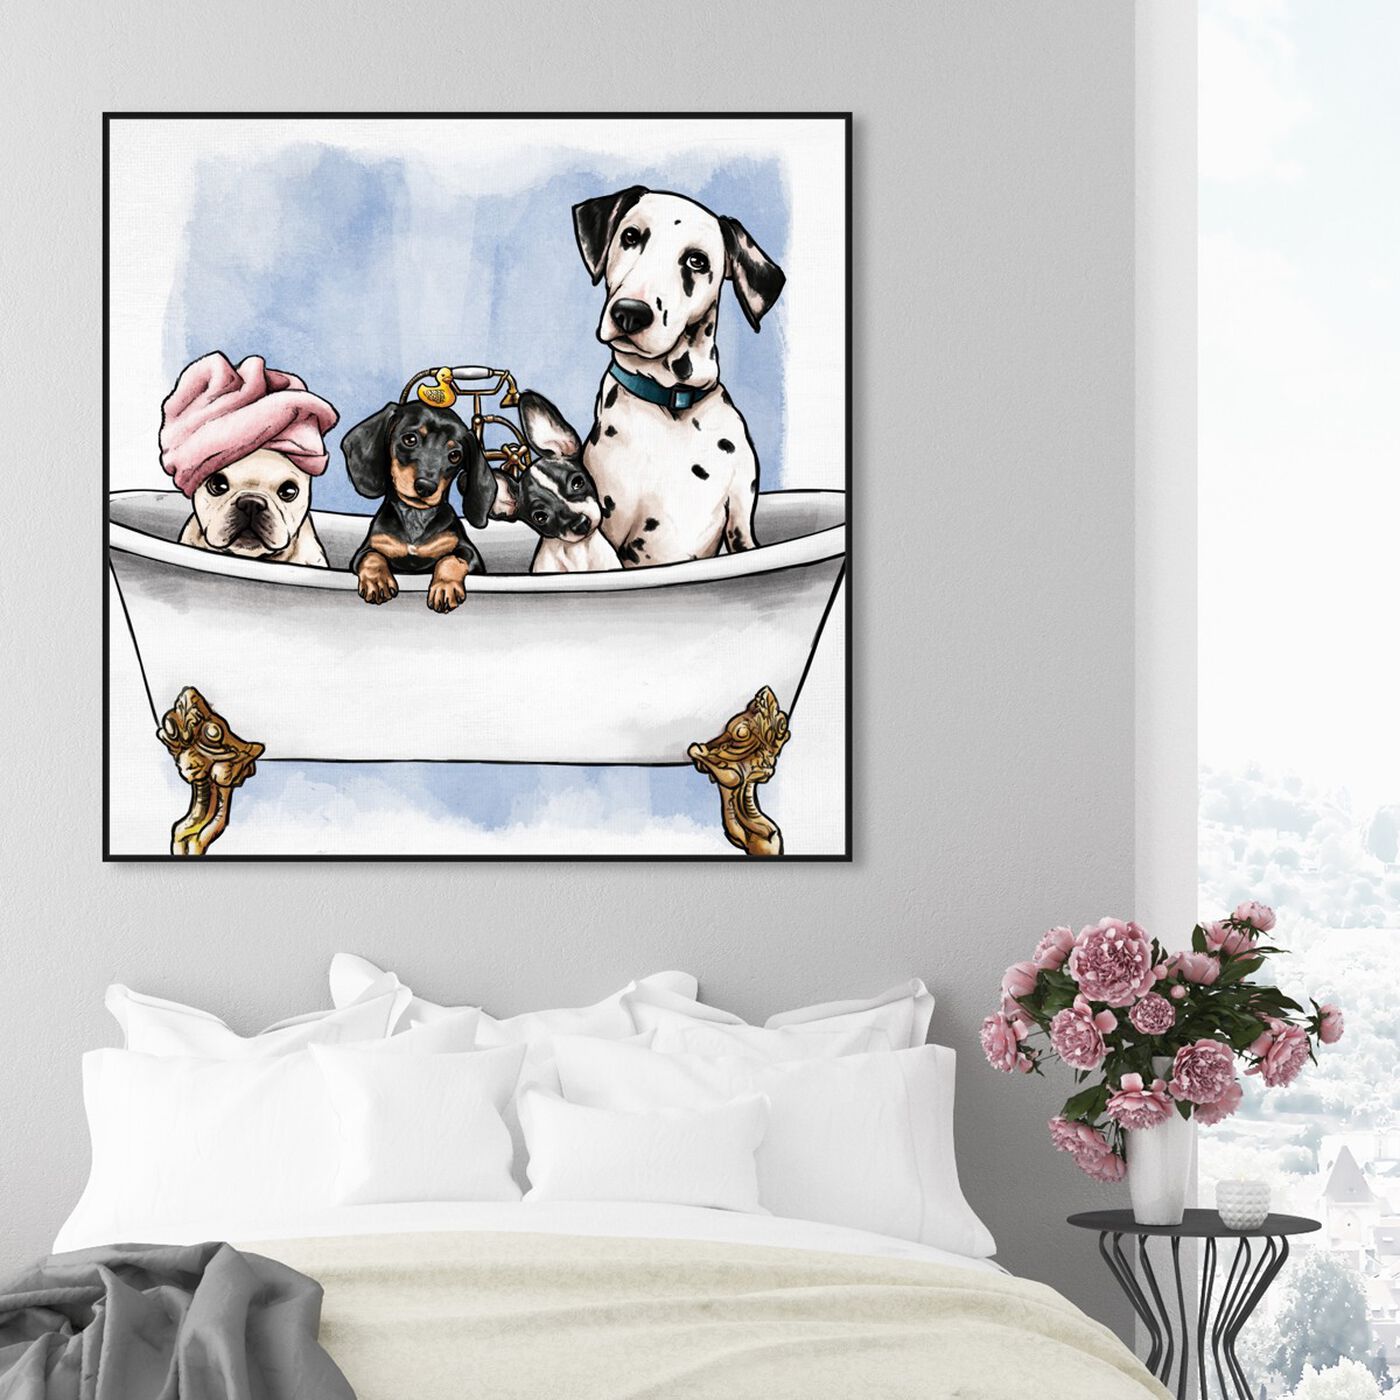 Hanging view of Pets In The Tub featuring bath and laundry and bathtubs art.